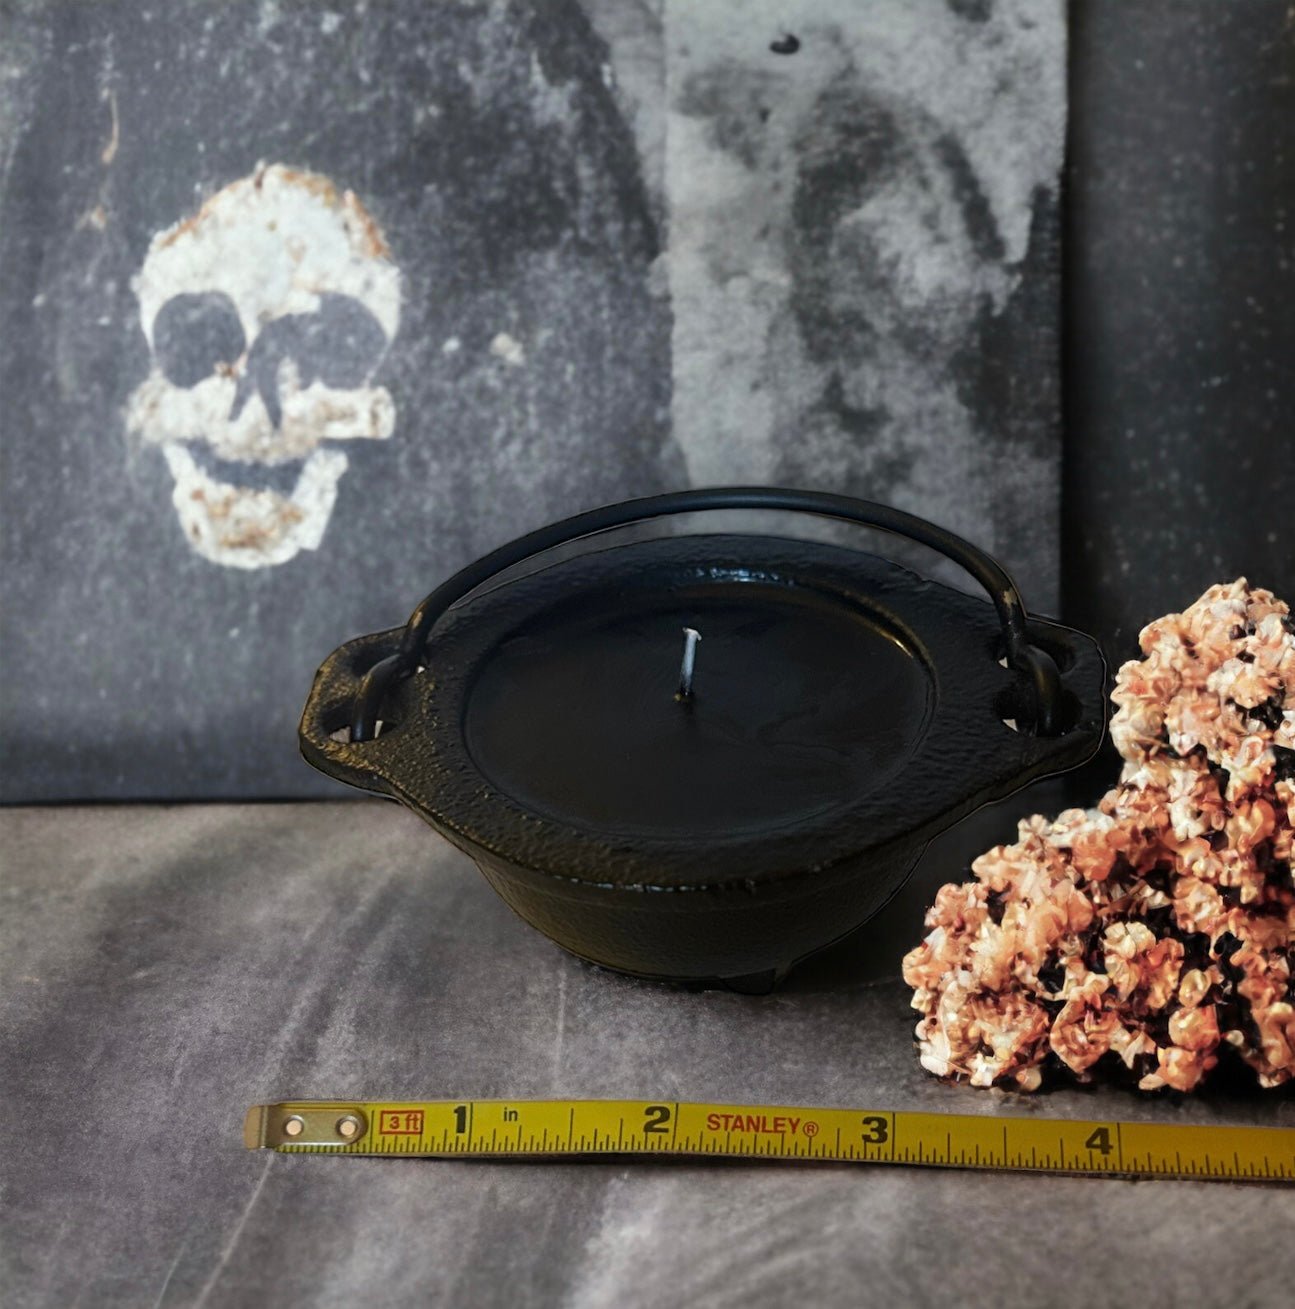 Mini Cast Iron Cauldron Black Candle SEANCE Scent |Incense and Oud|Goth Candles| Halloween Gift